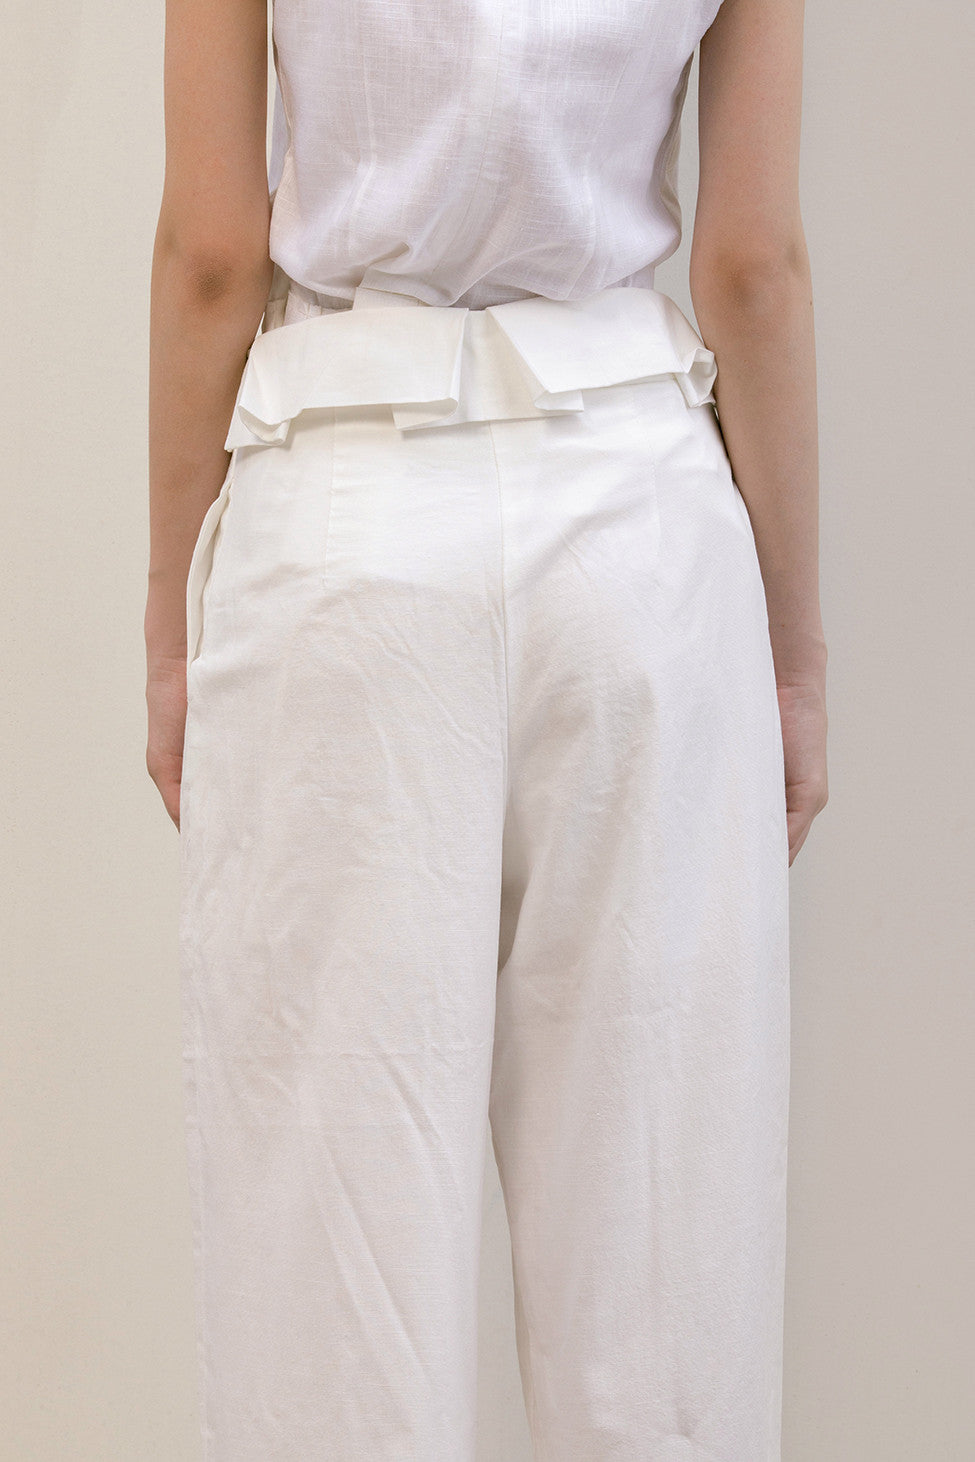 The Noelle Pant in white featuring pleated front with origami design, two slant pockets. Lightweight.